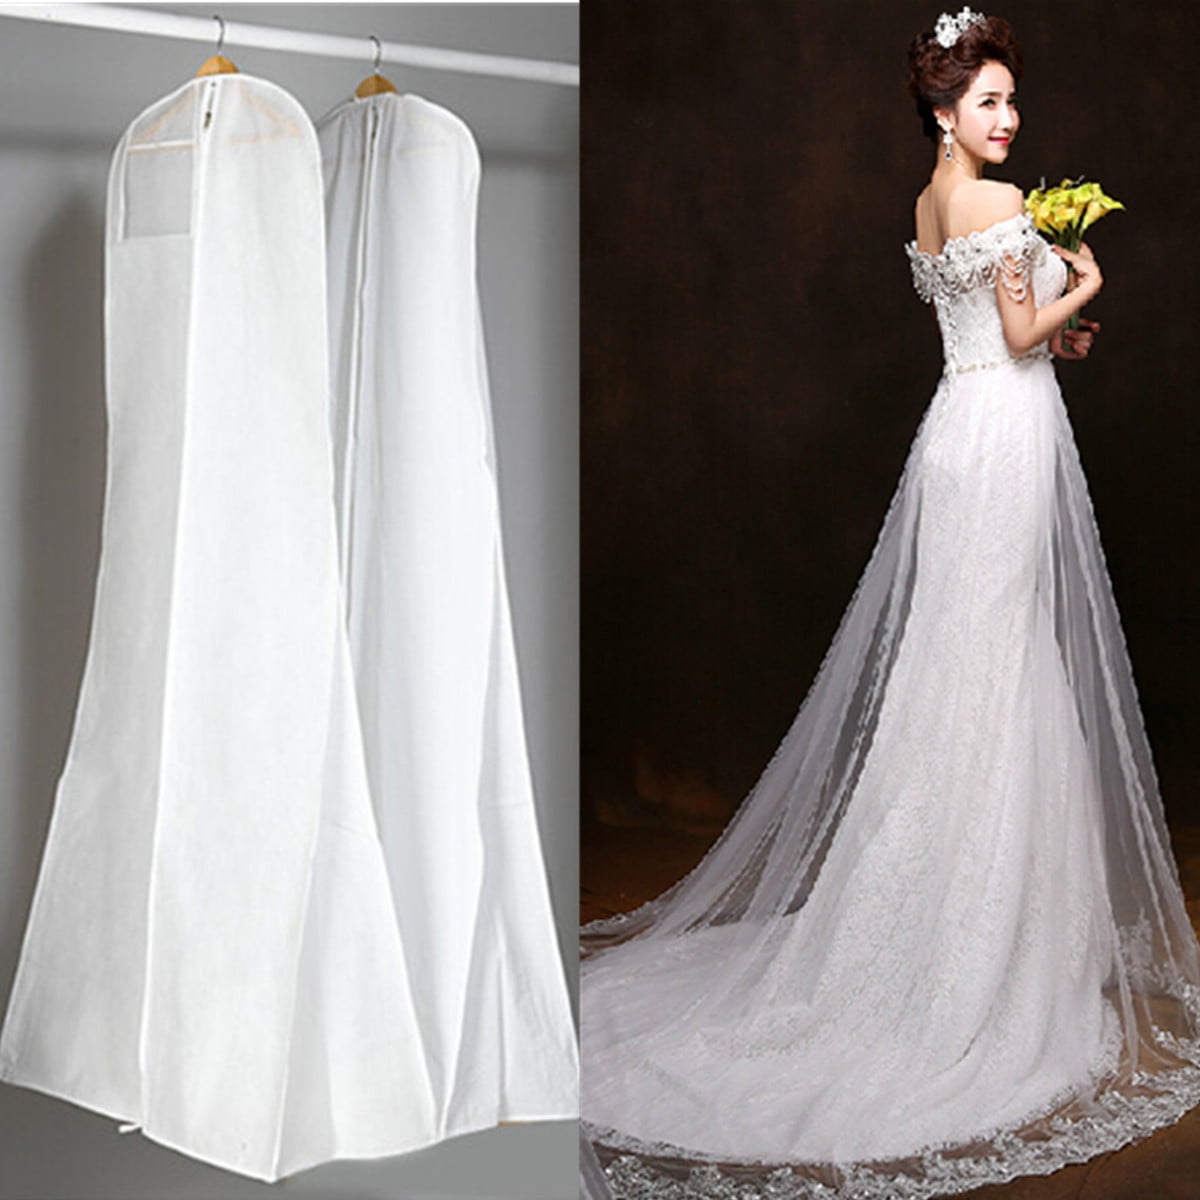 Large Bridal Gown Wedding Dress Storage Bag Breathable Garment Dust Proof Cover 